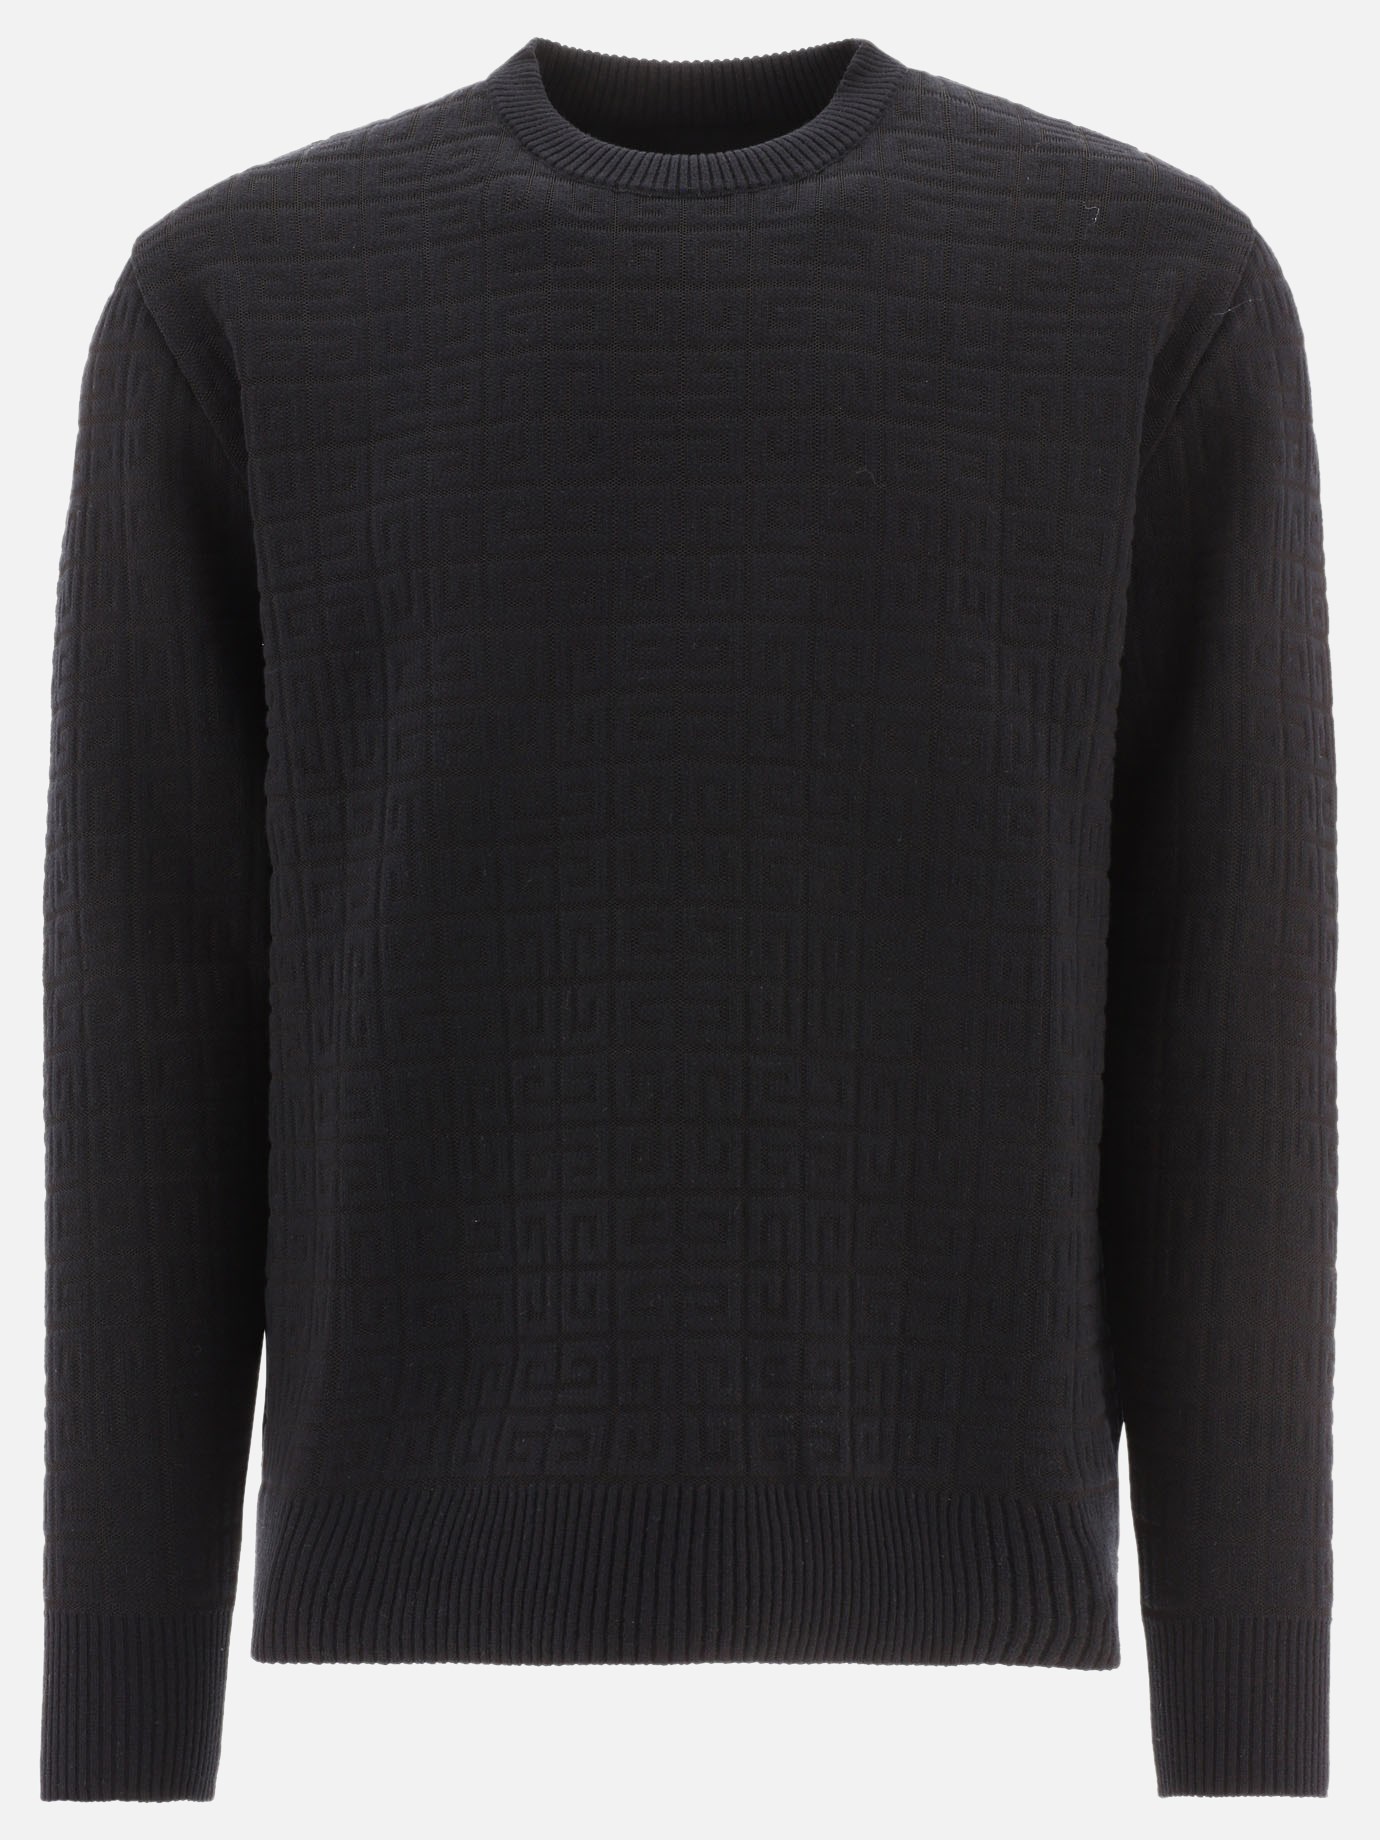  4G  sweaterby Givenchy - 5